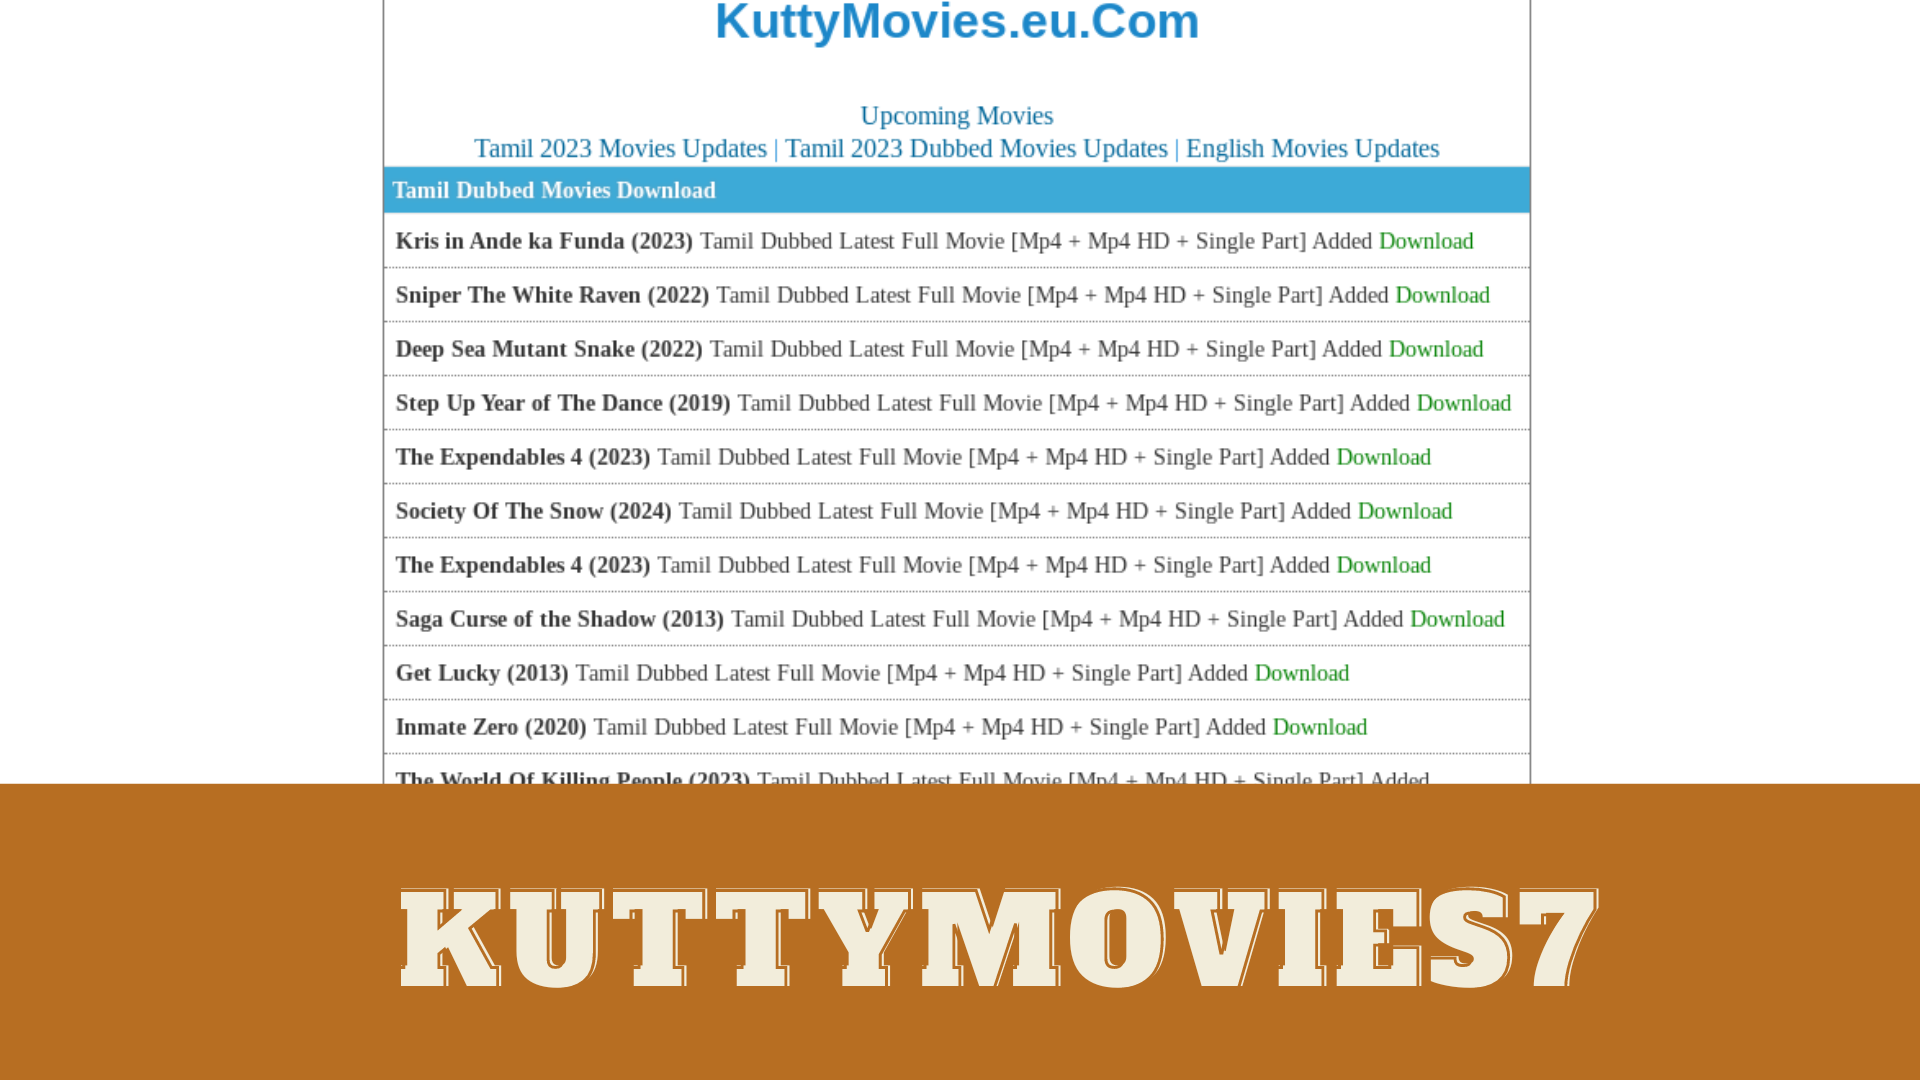 Kuttymovies7: A Review of the Controversial Streaming Site